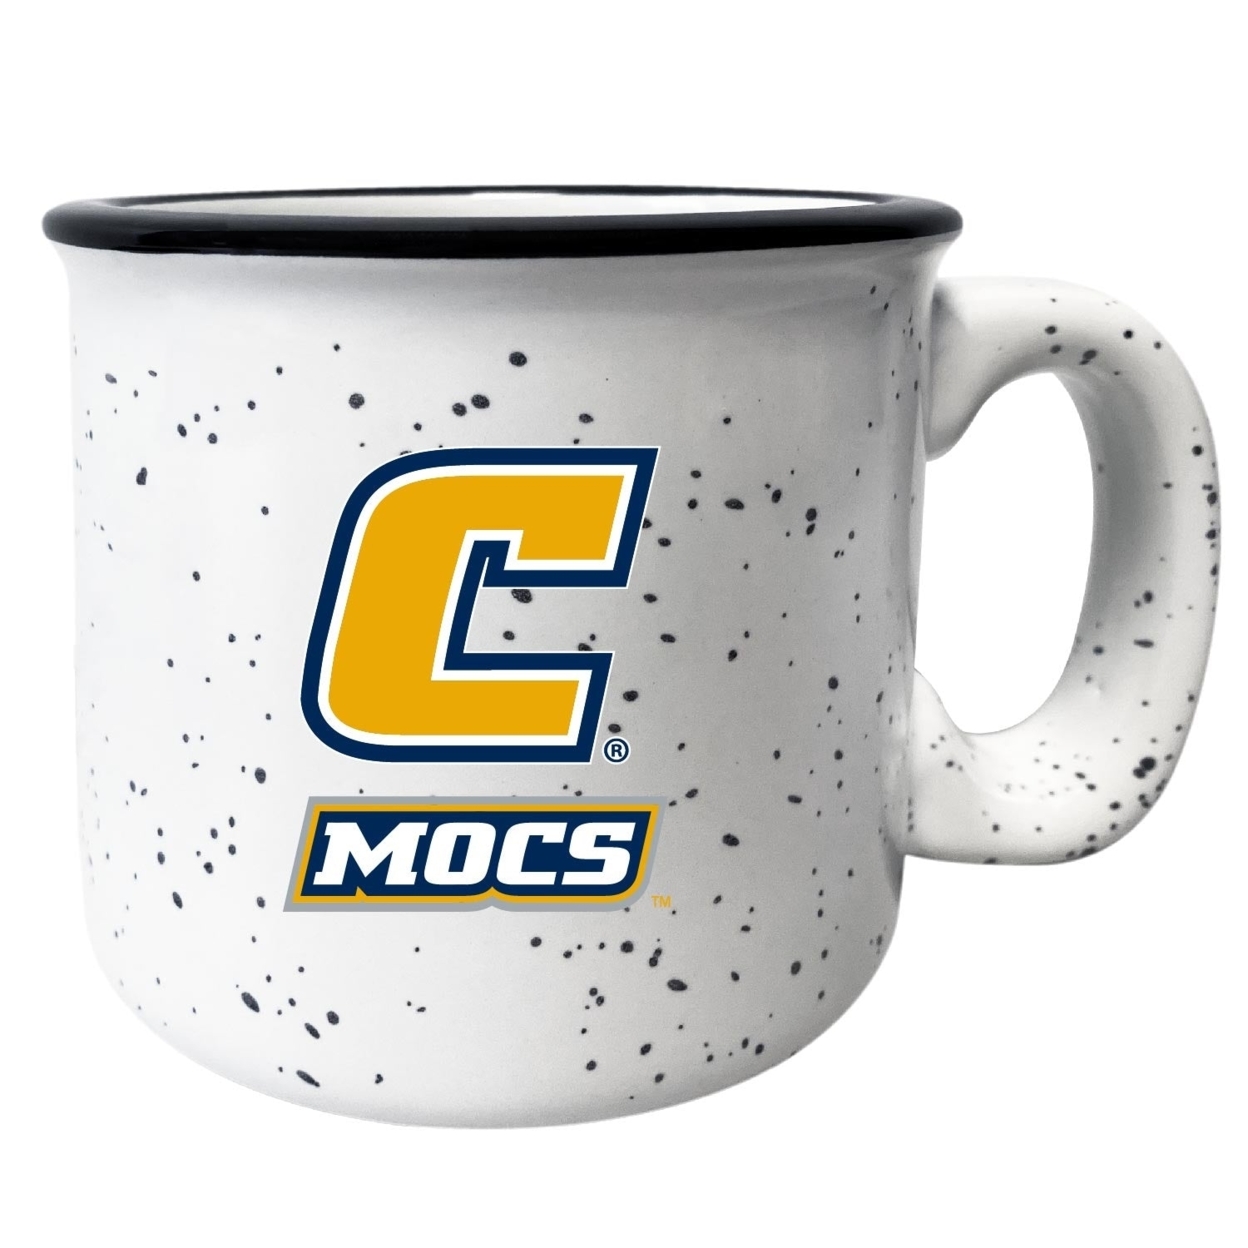 University Of Tennessee At Chattanooga Speckled Ceramic Camper Coffee Mug - Choose Your Color - Navy